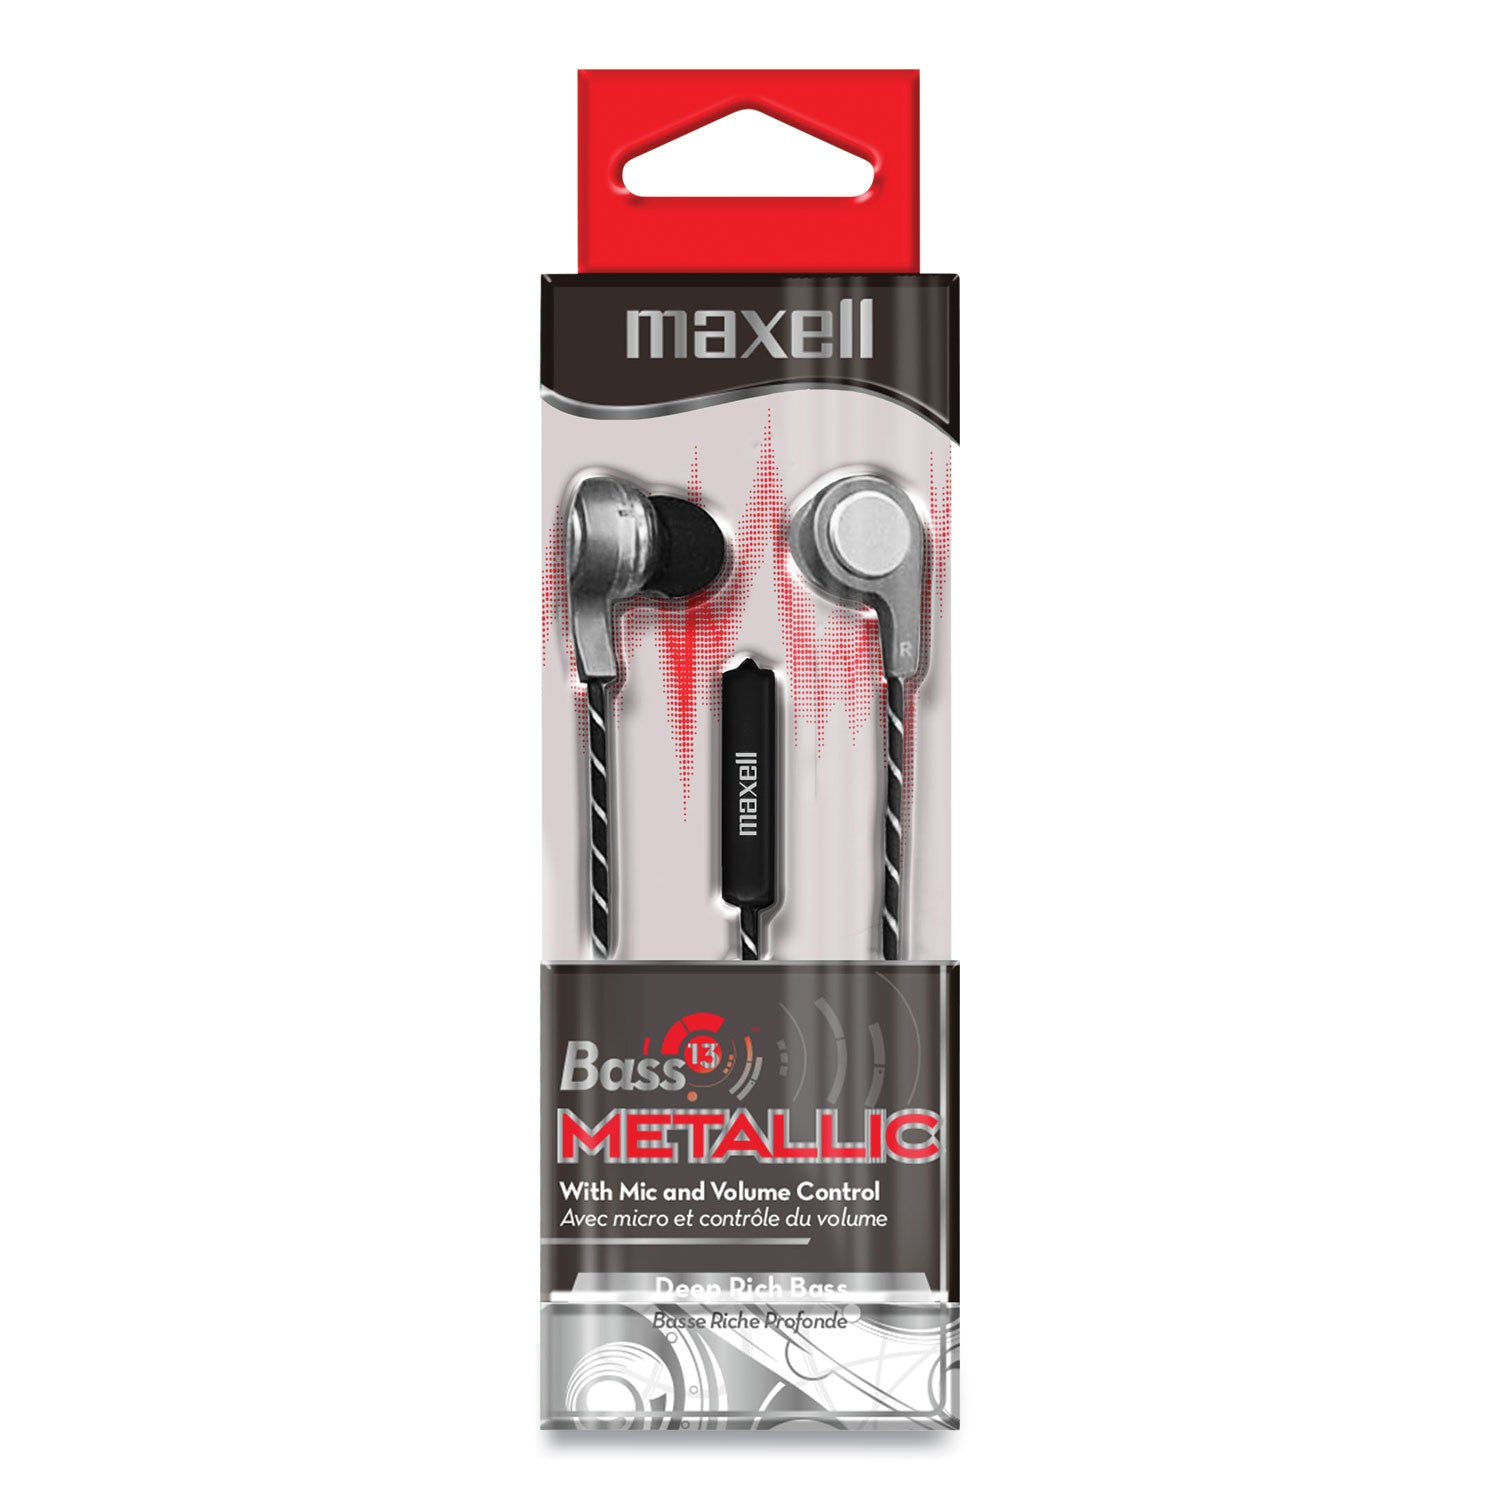 bass-13-metallic-earbuds-with-microphone-4-ft-cord-silver_max199600 - 2